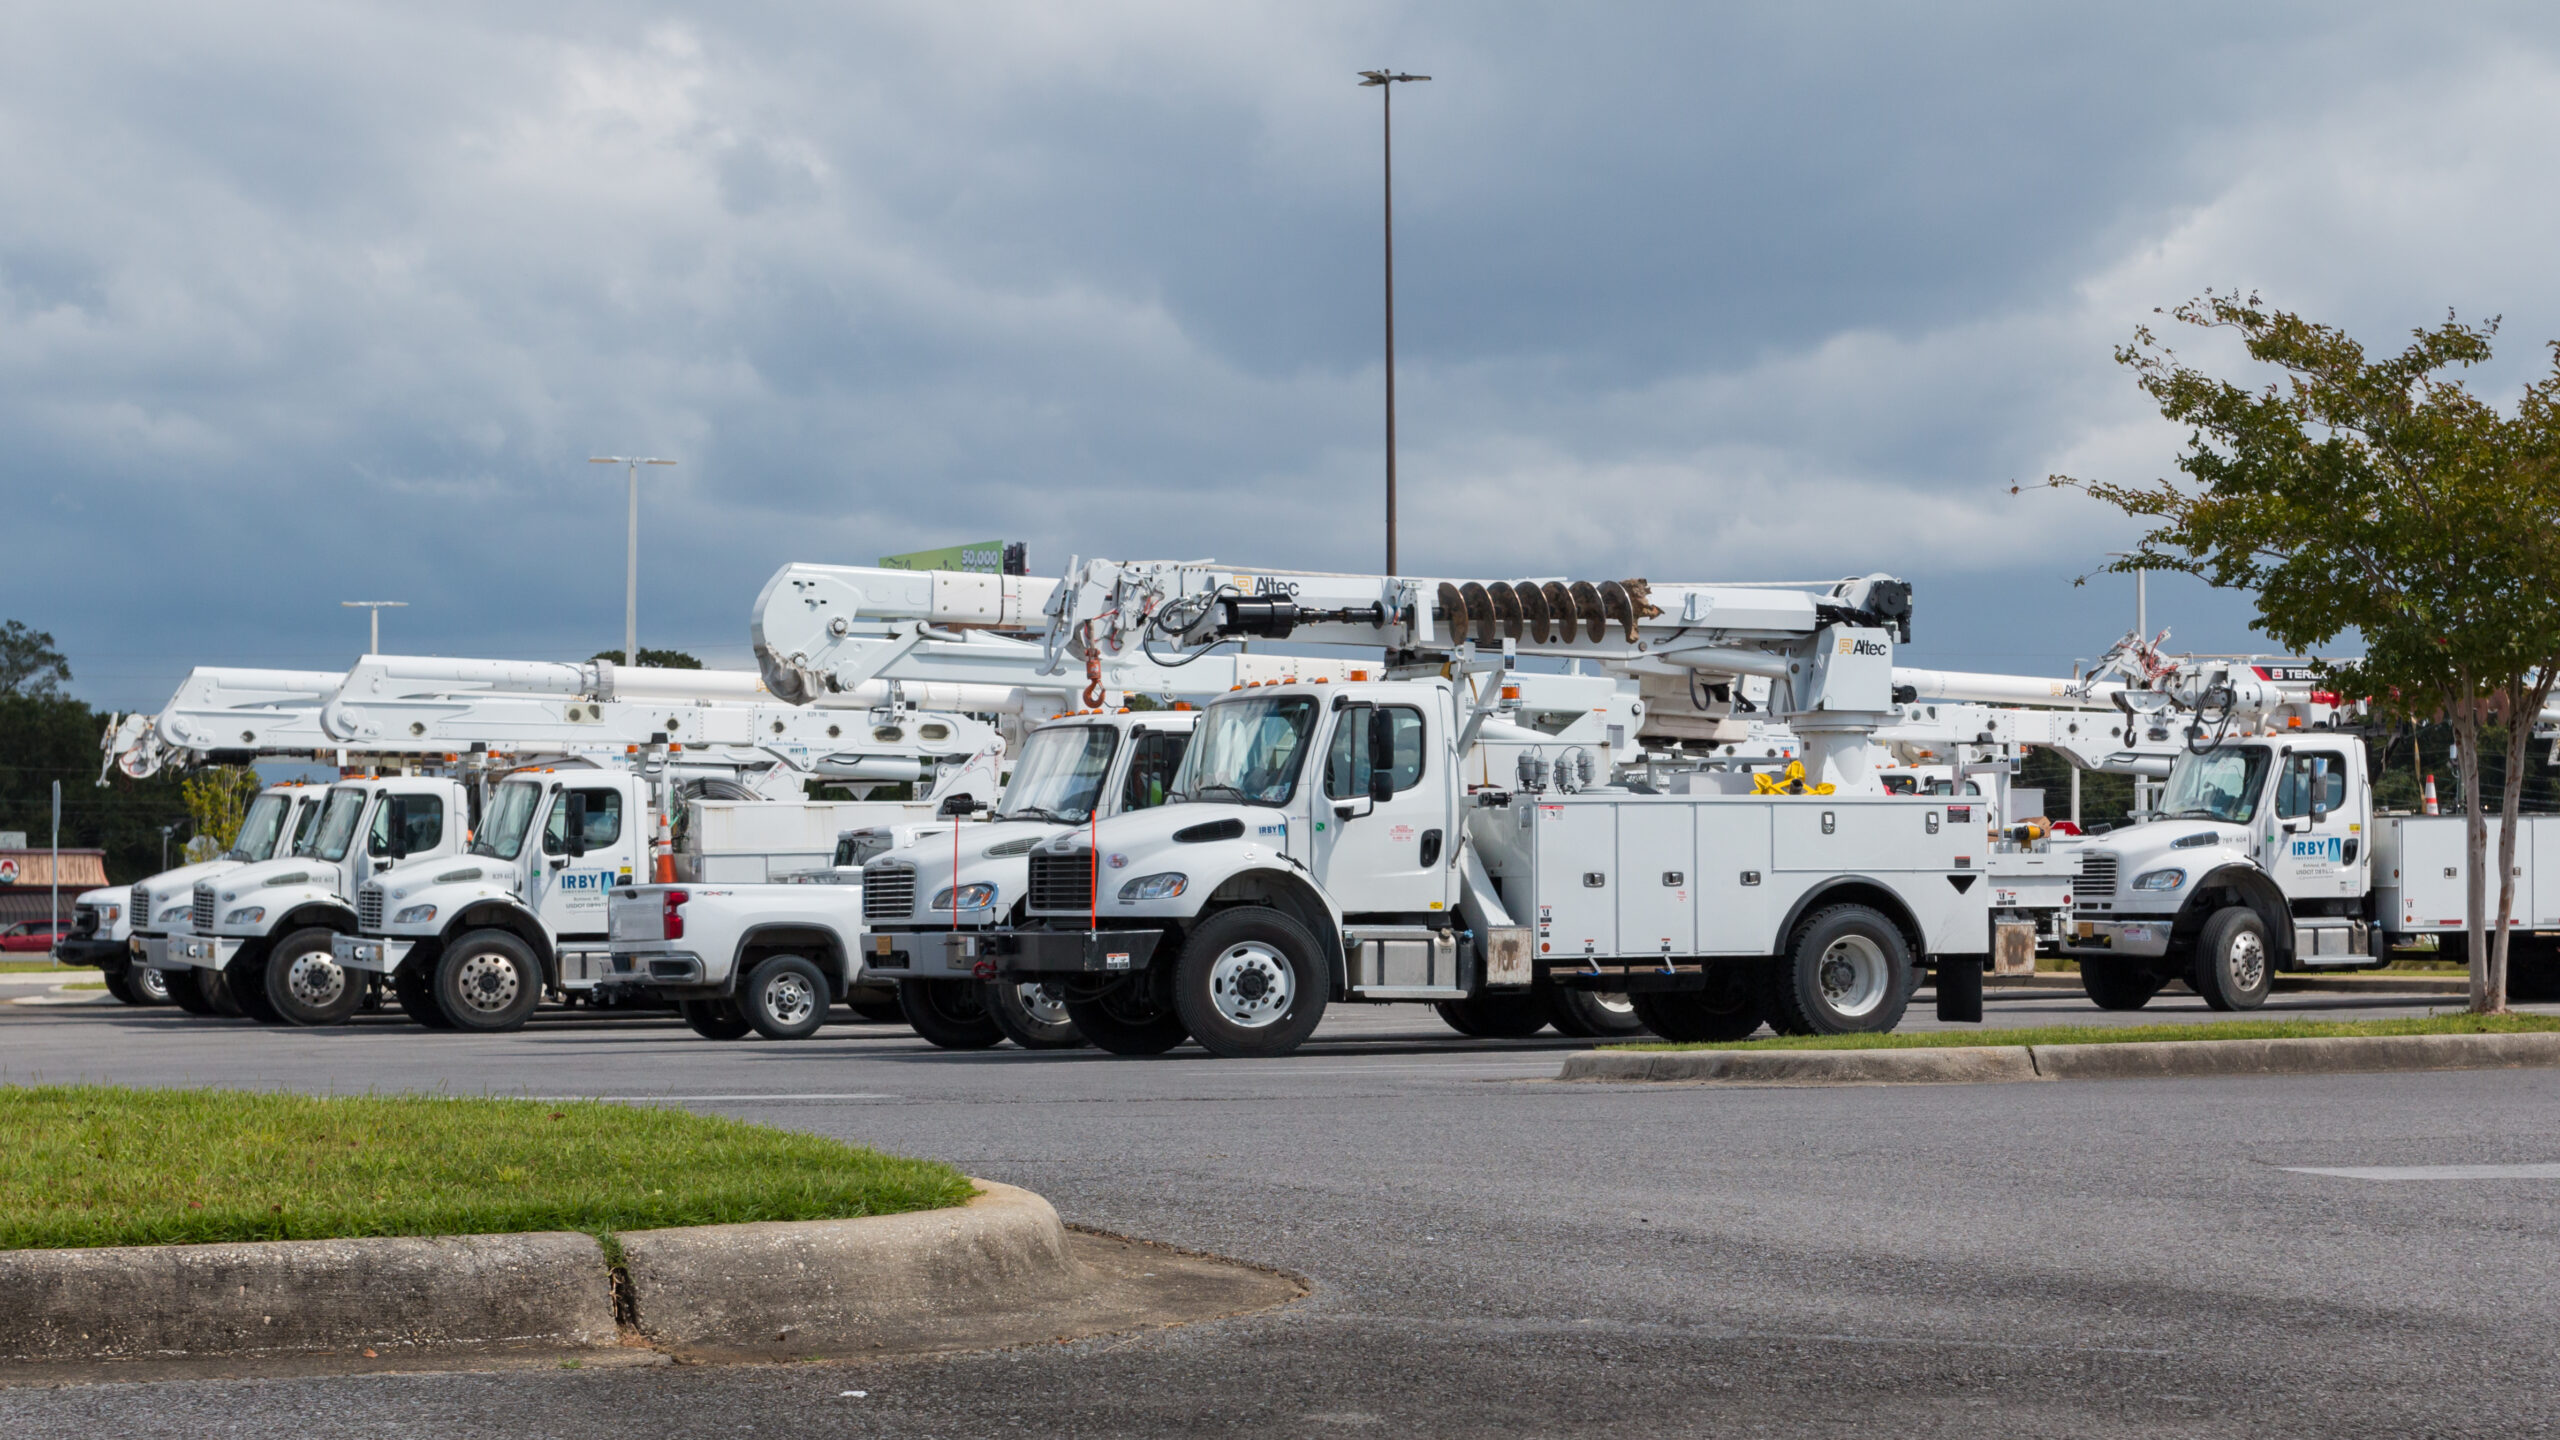 fleet of electric utility bucket trucks parked, representing tips for for electrification planning.